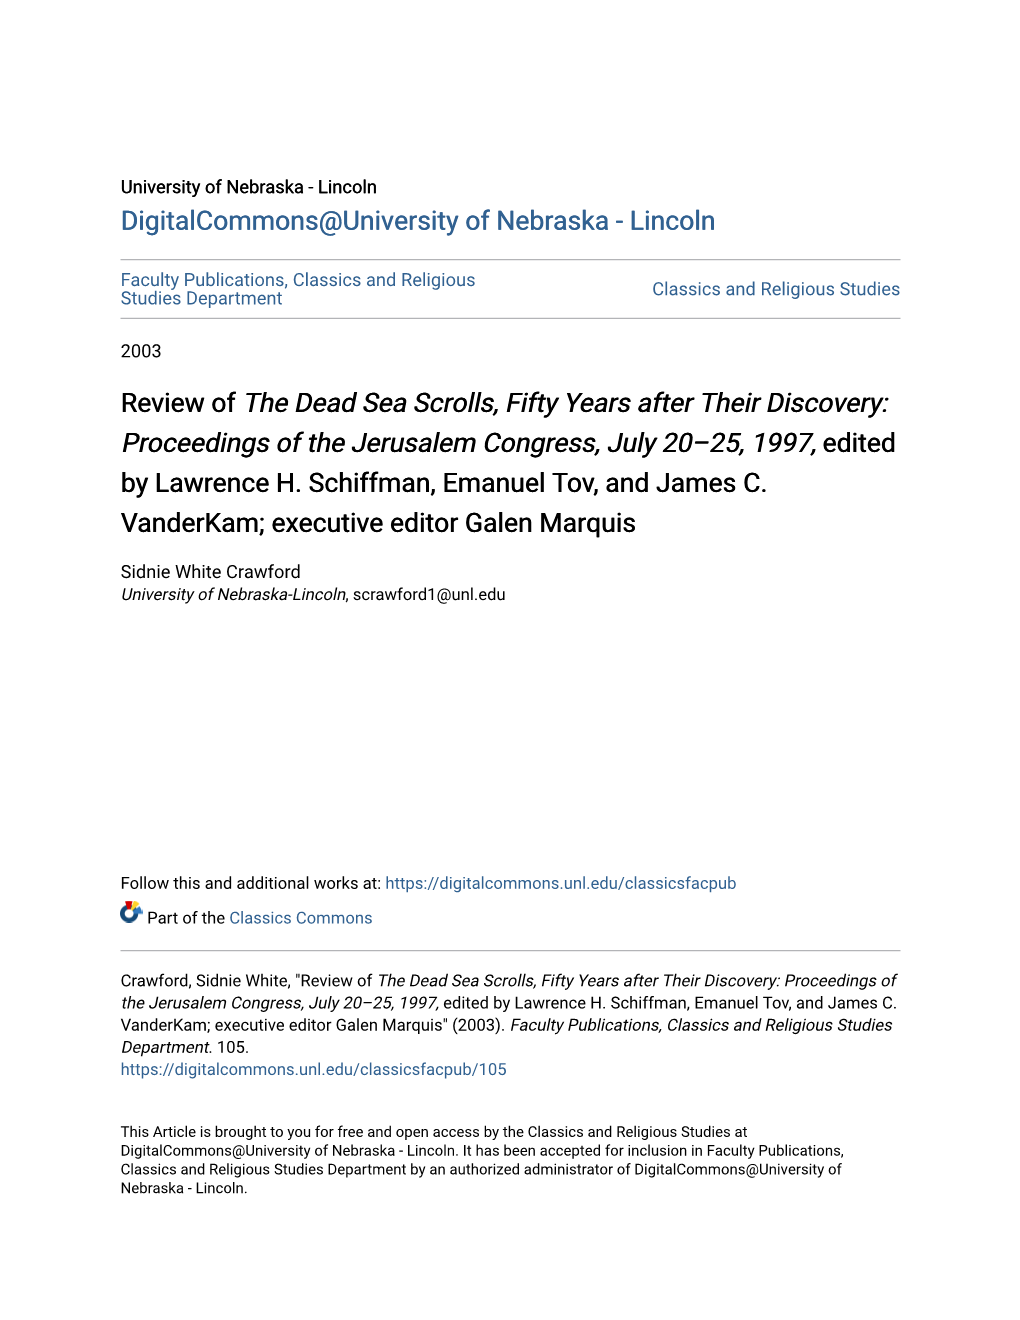 Review of the Dead Sea Scrolls, Fifty Years After Their Discovery: Proceedings of the Jerusalem Congress, July 20–25, 1997, Edited by Lawrence H